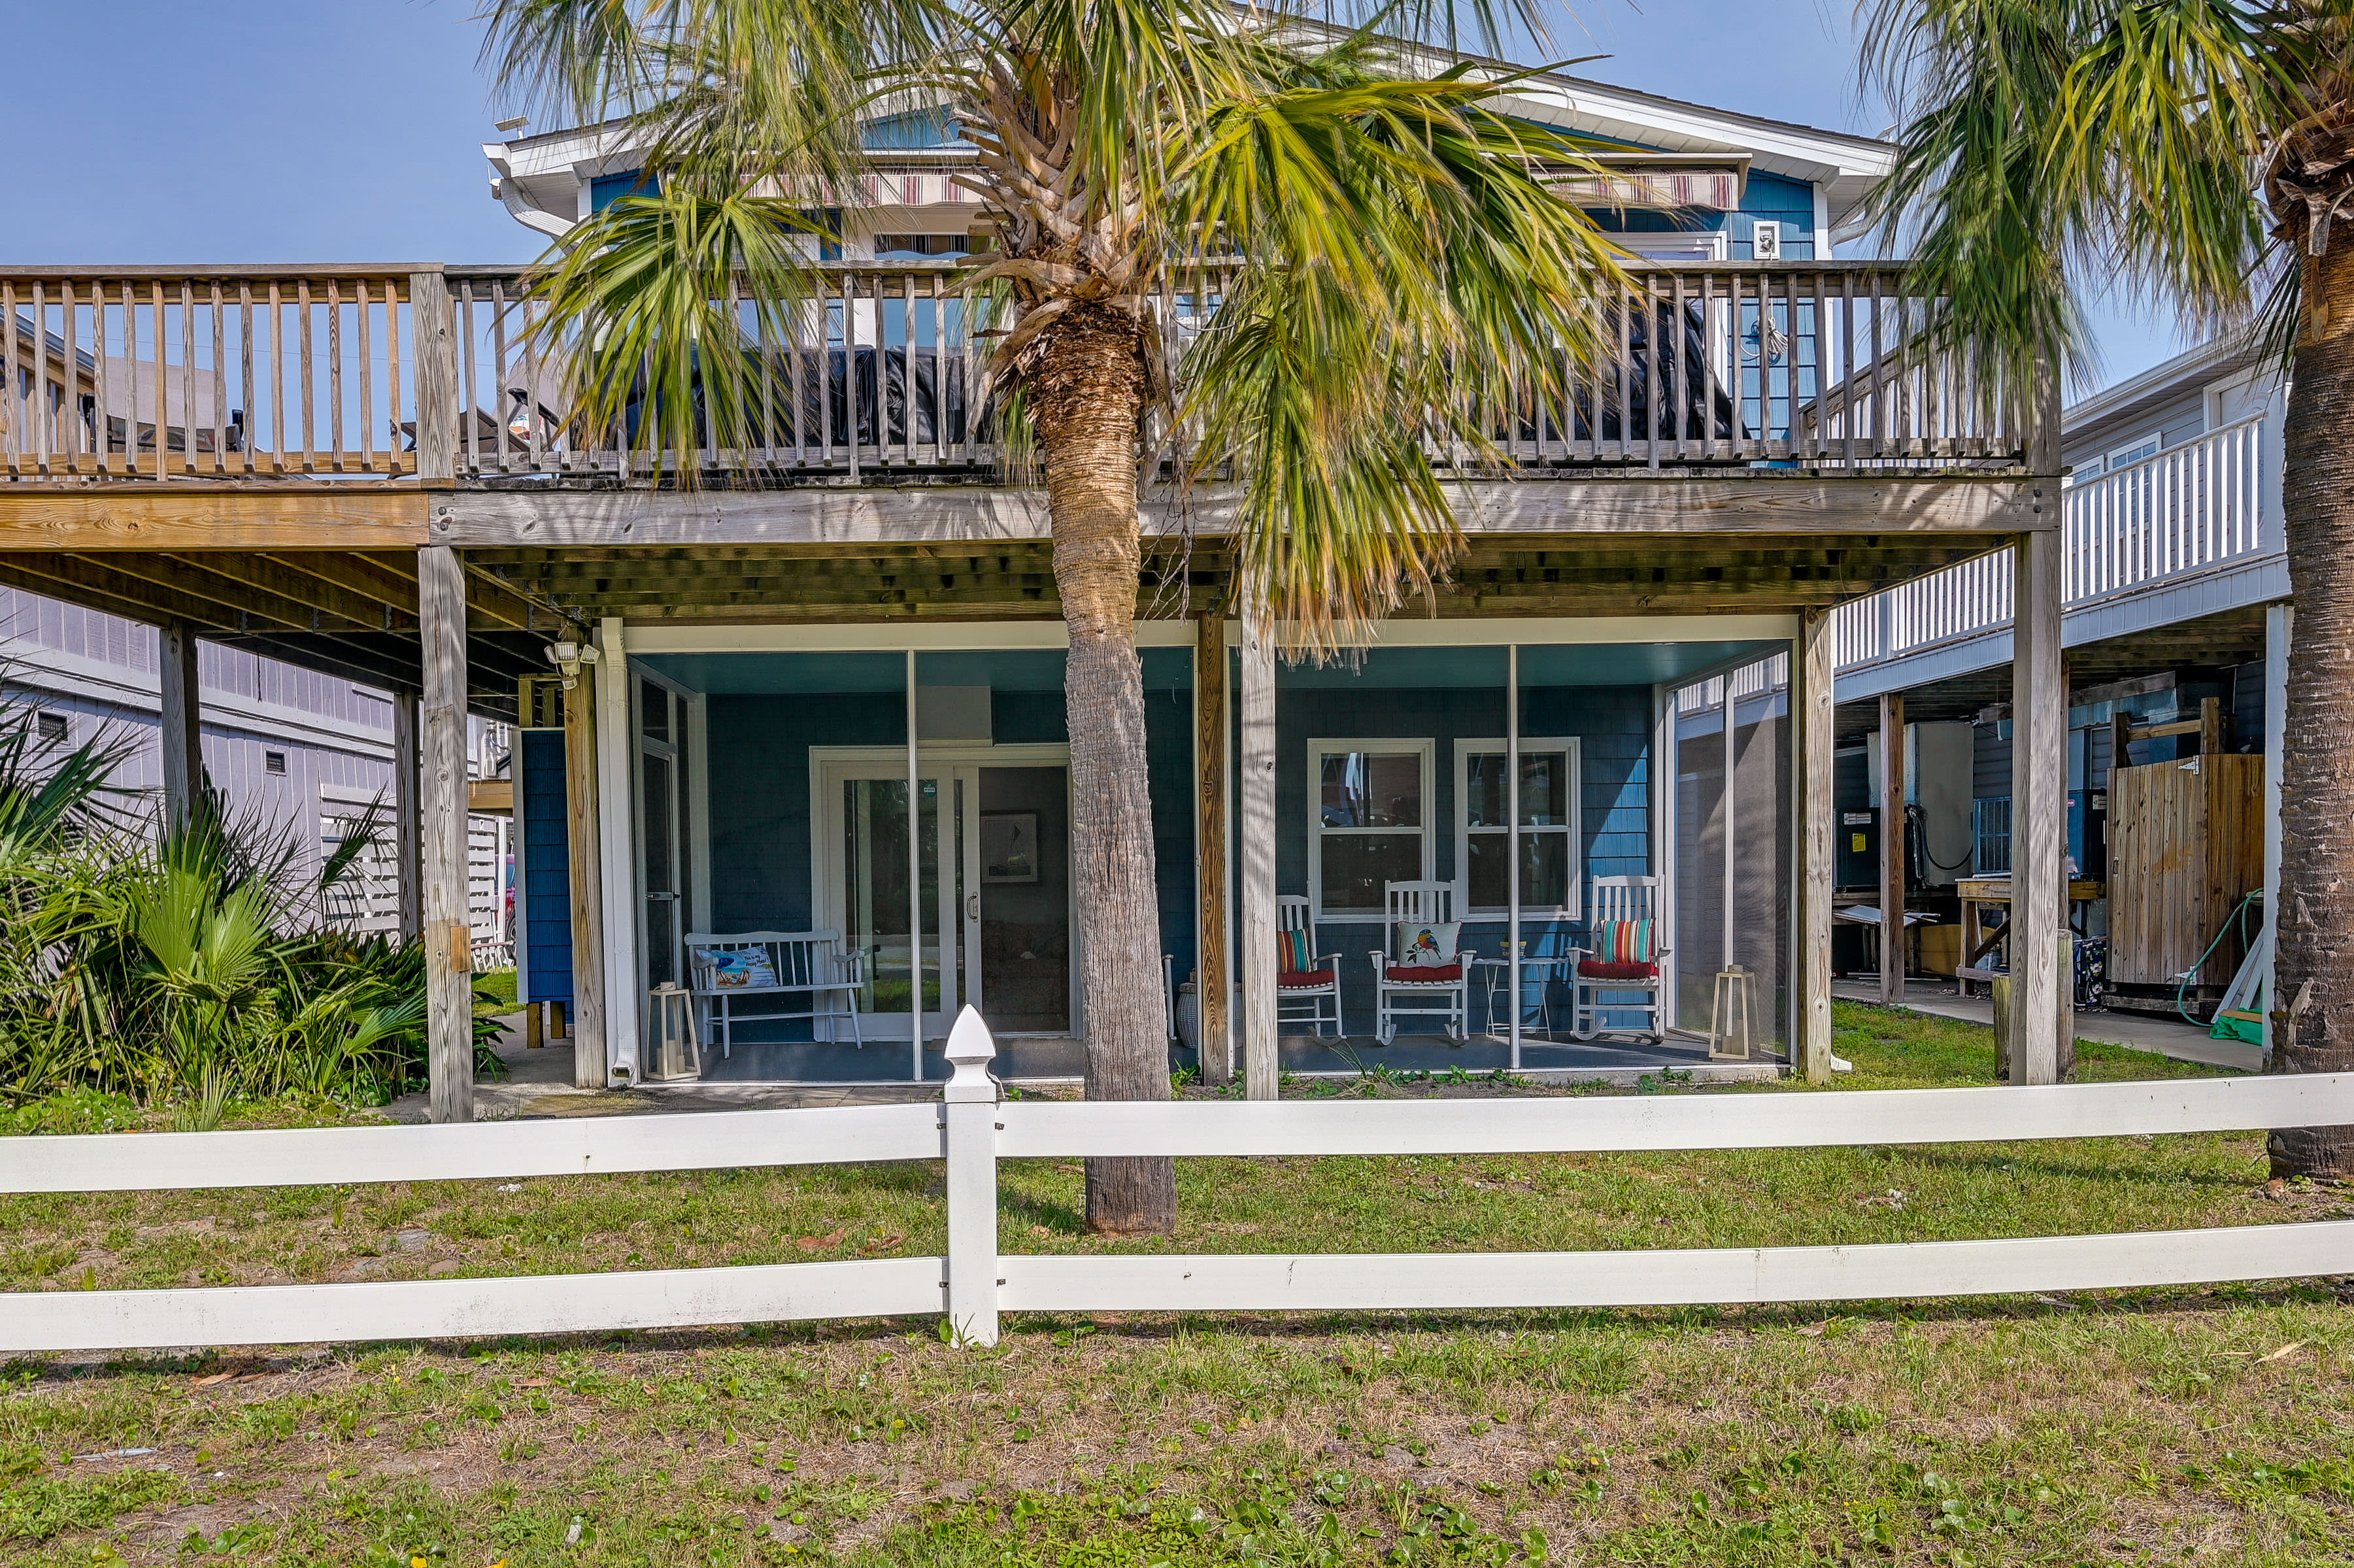 Surfside Beach Vacation Rental | 2BR | 1BA | 1 Step Required for Access